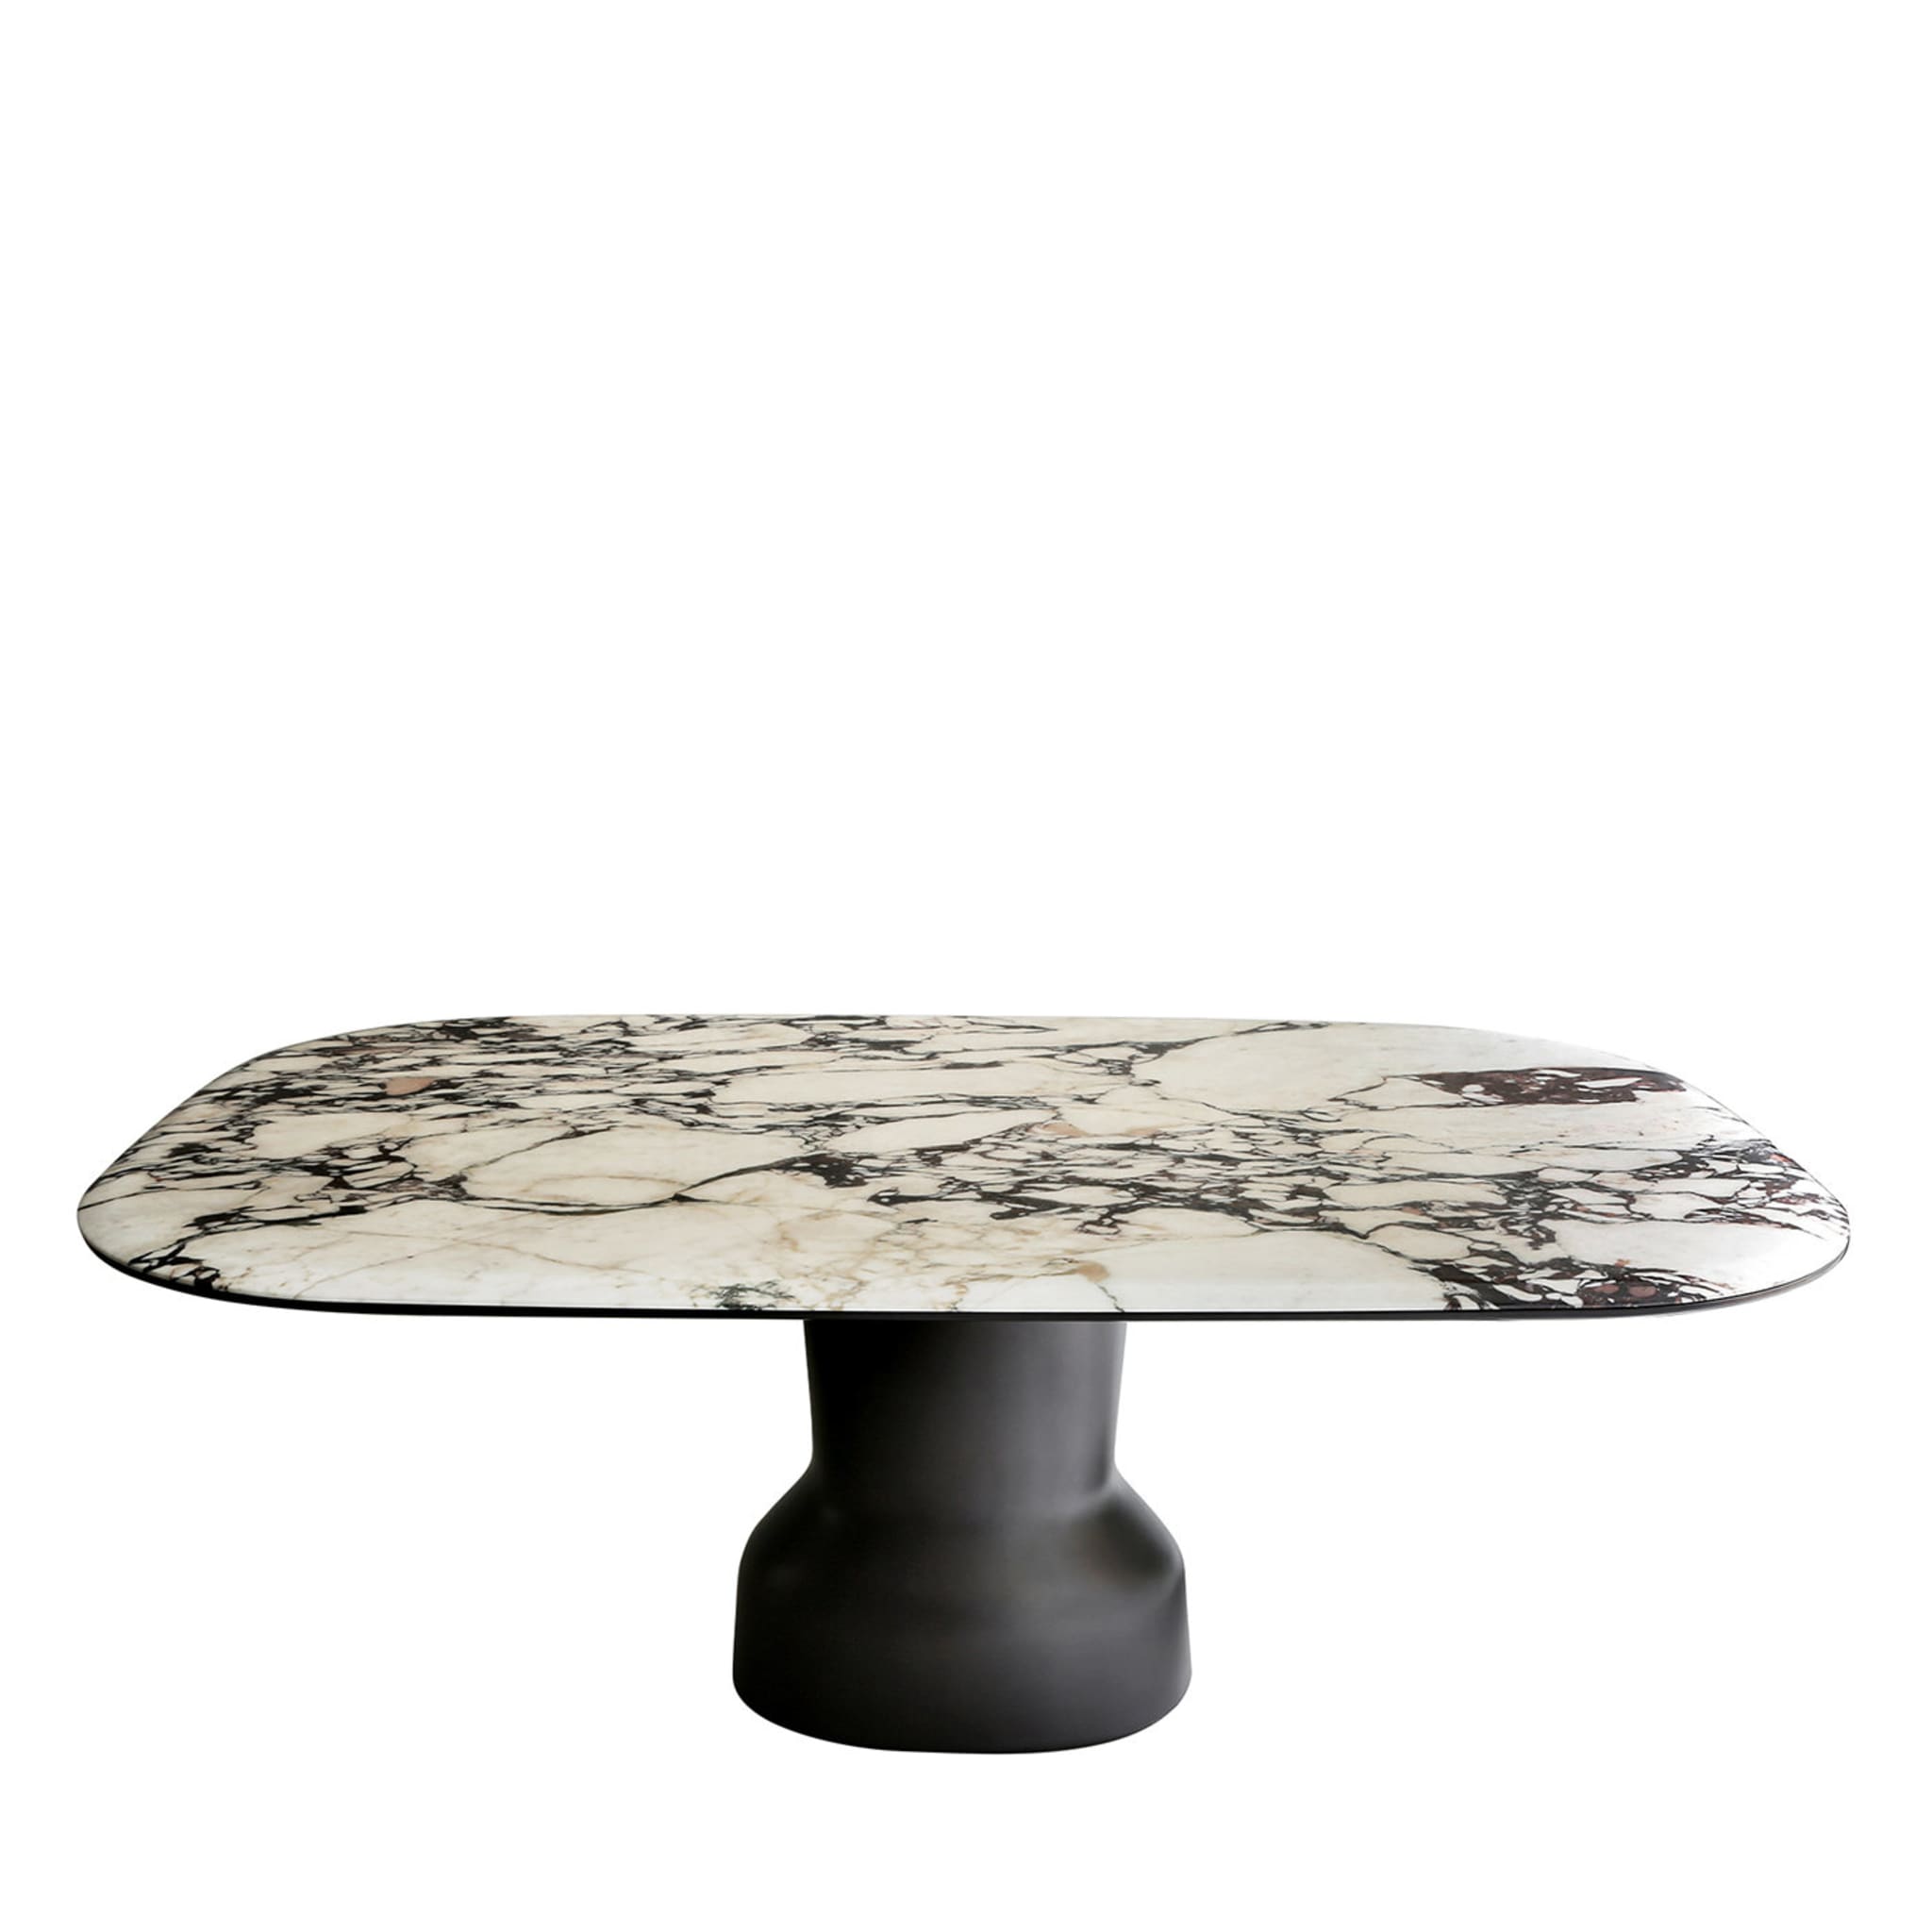 Musa Table by Emanuele Genuizzi - Main view